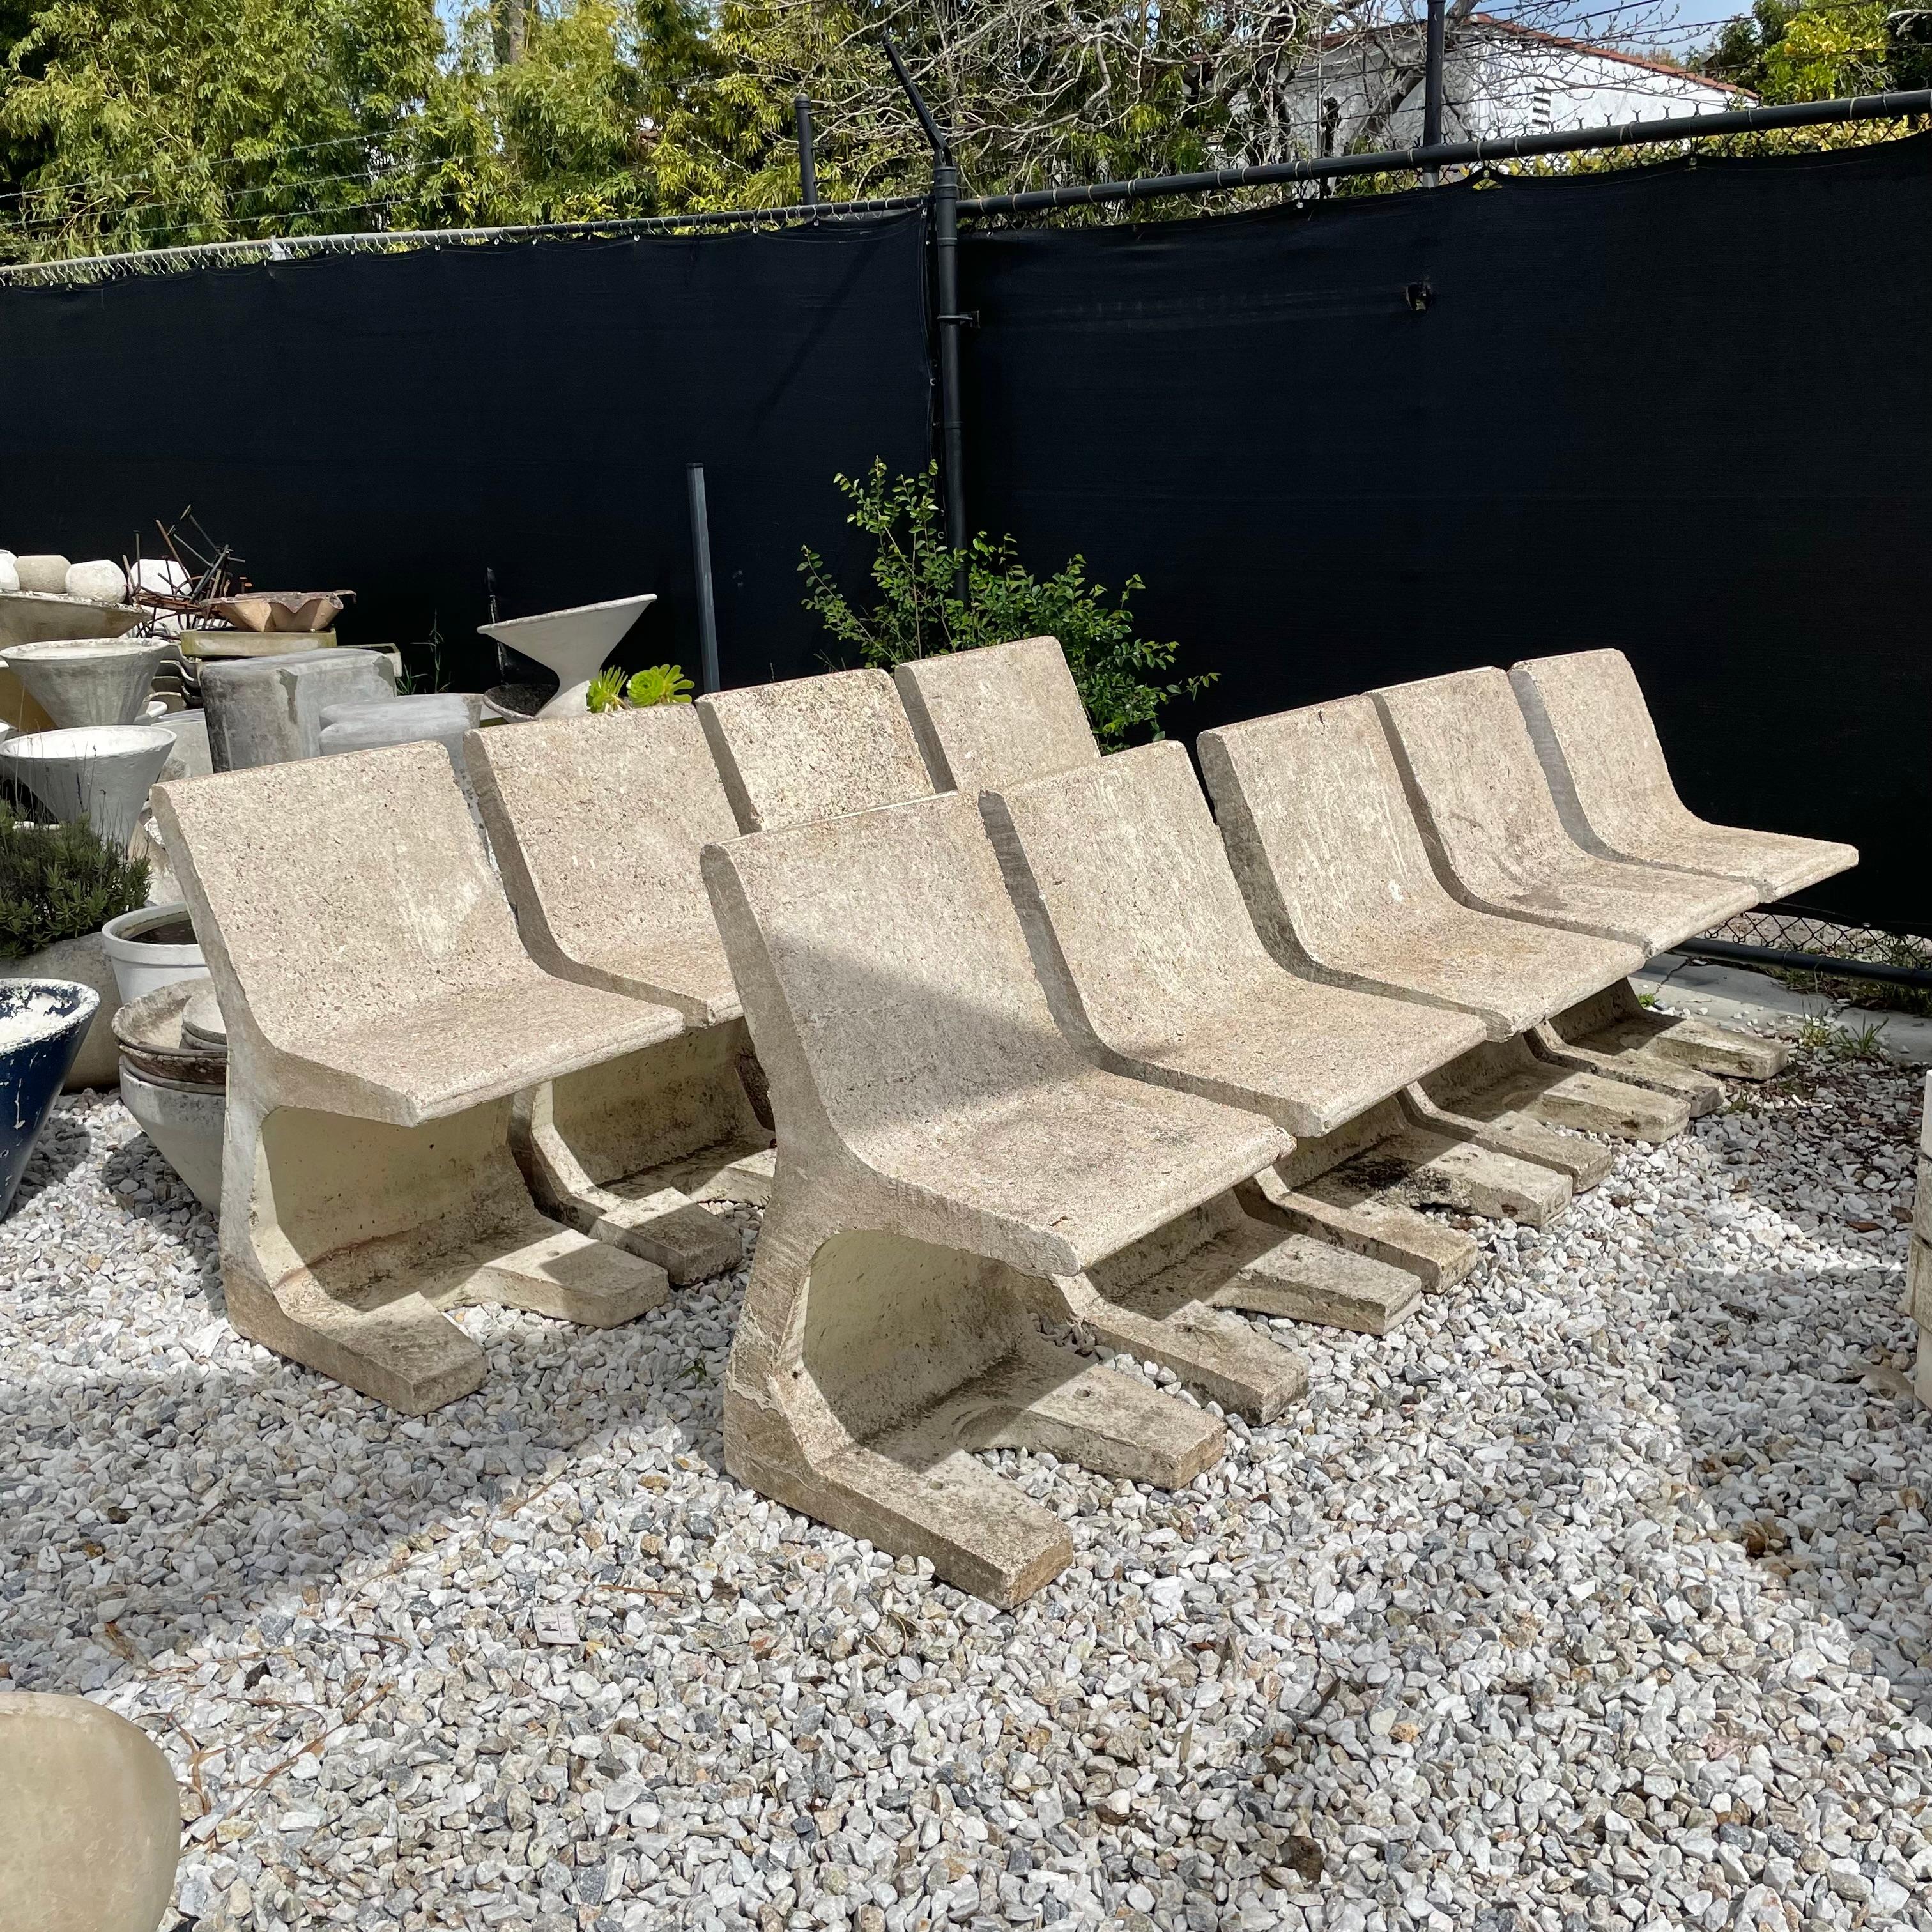 Absolutely stunning concrete chairs with a forked base. Extremely rare and made of a tan aggregate ranging between coarse and fine. The unique sculptural design of these chairs allows them to be introduced into any design story with ease. Prominent